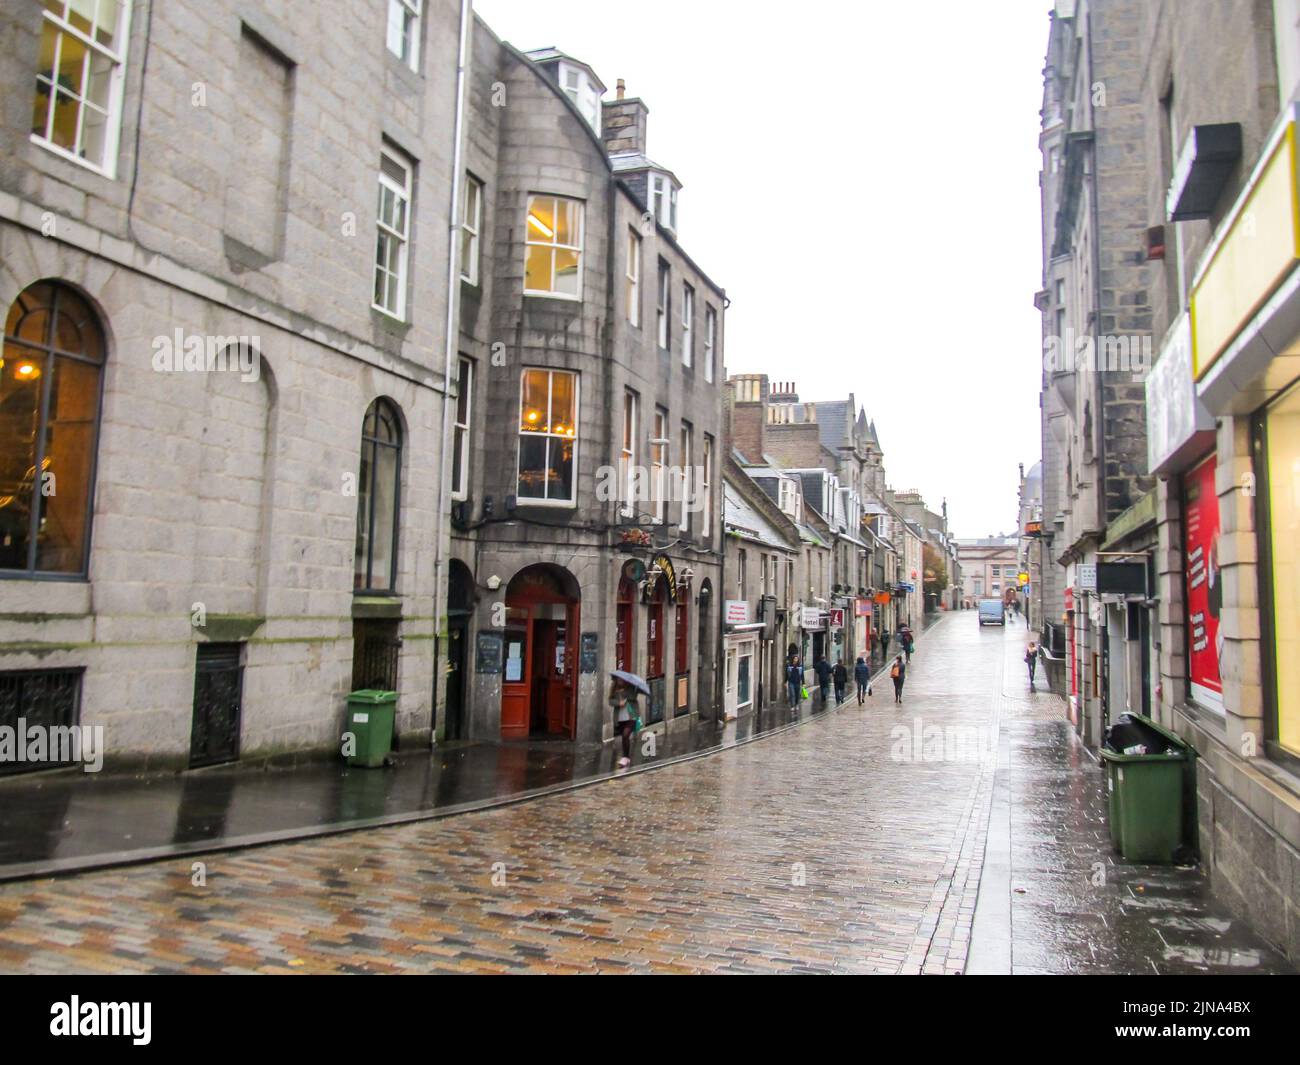 Looking down a narrow brick road, flanked by granite buildings, in Aberdeen, Scotland, wet after a quick rain shower Stock Photo